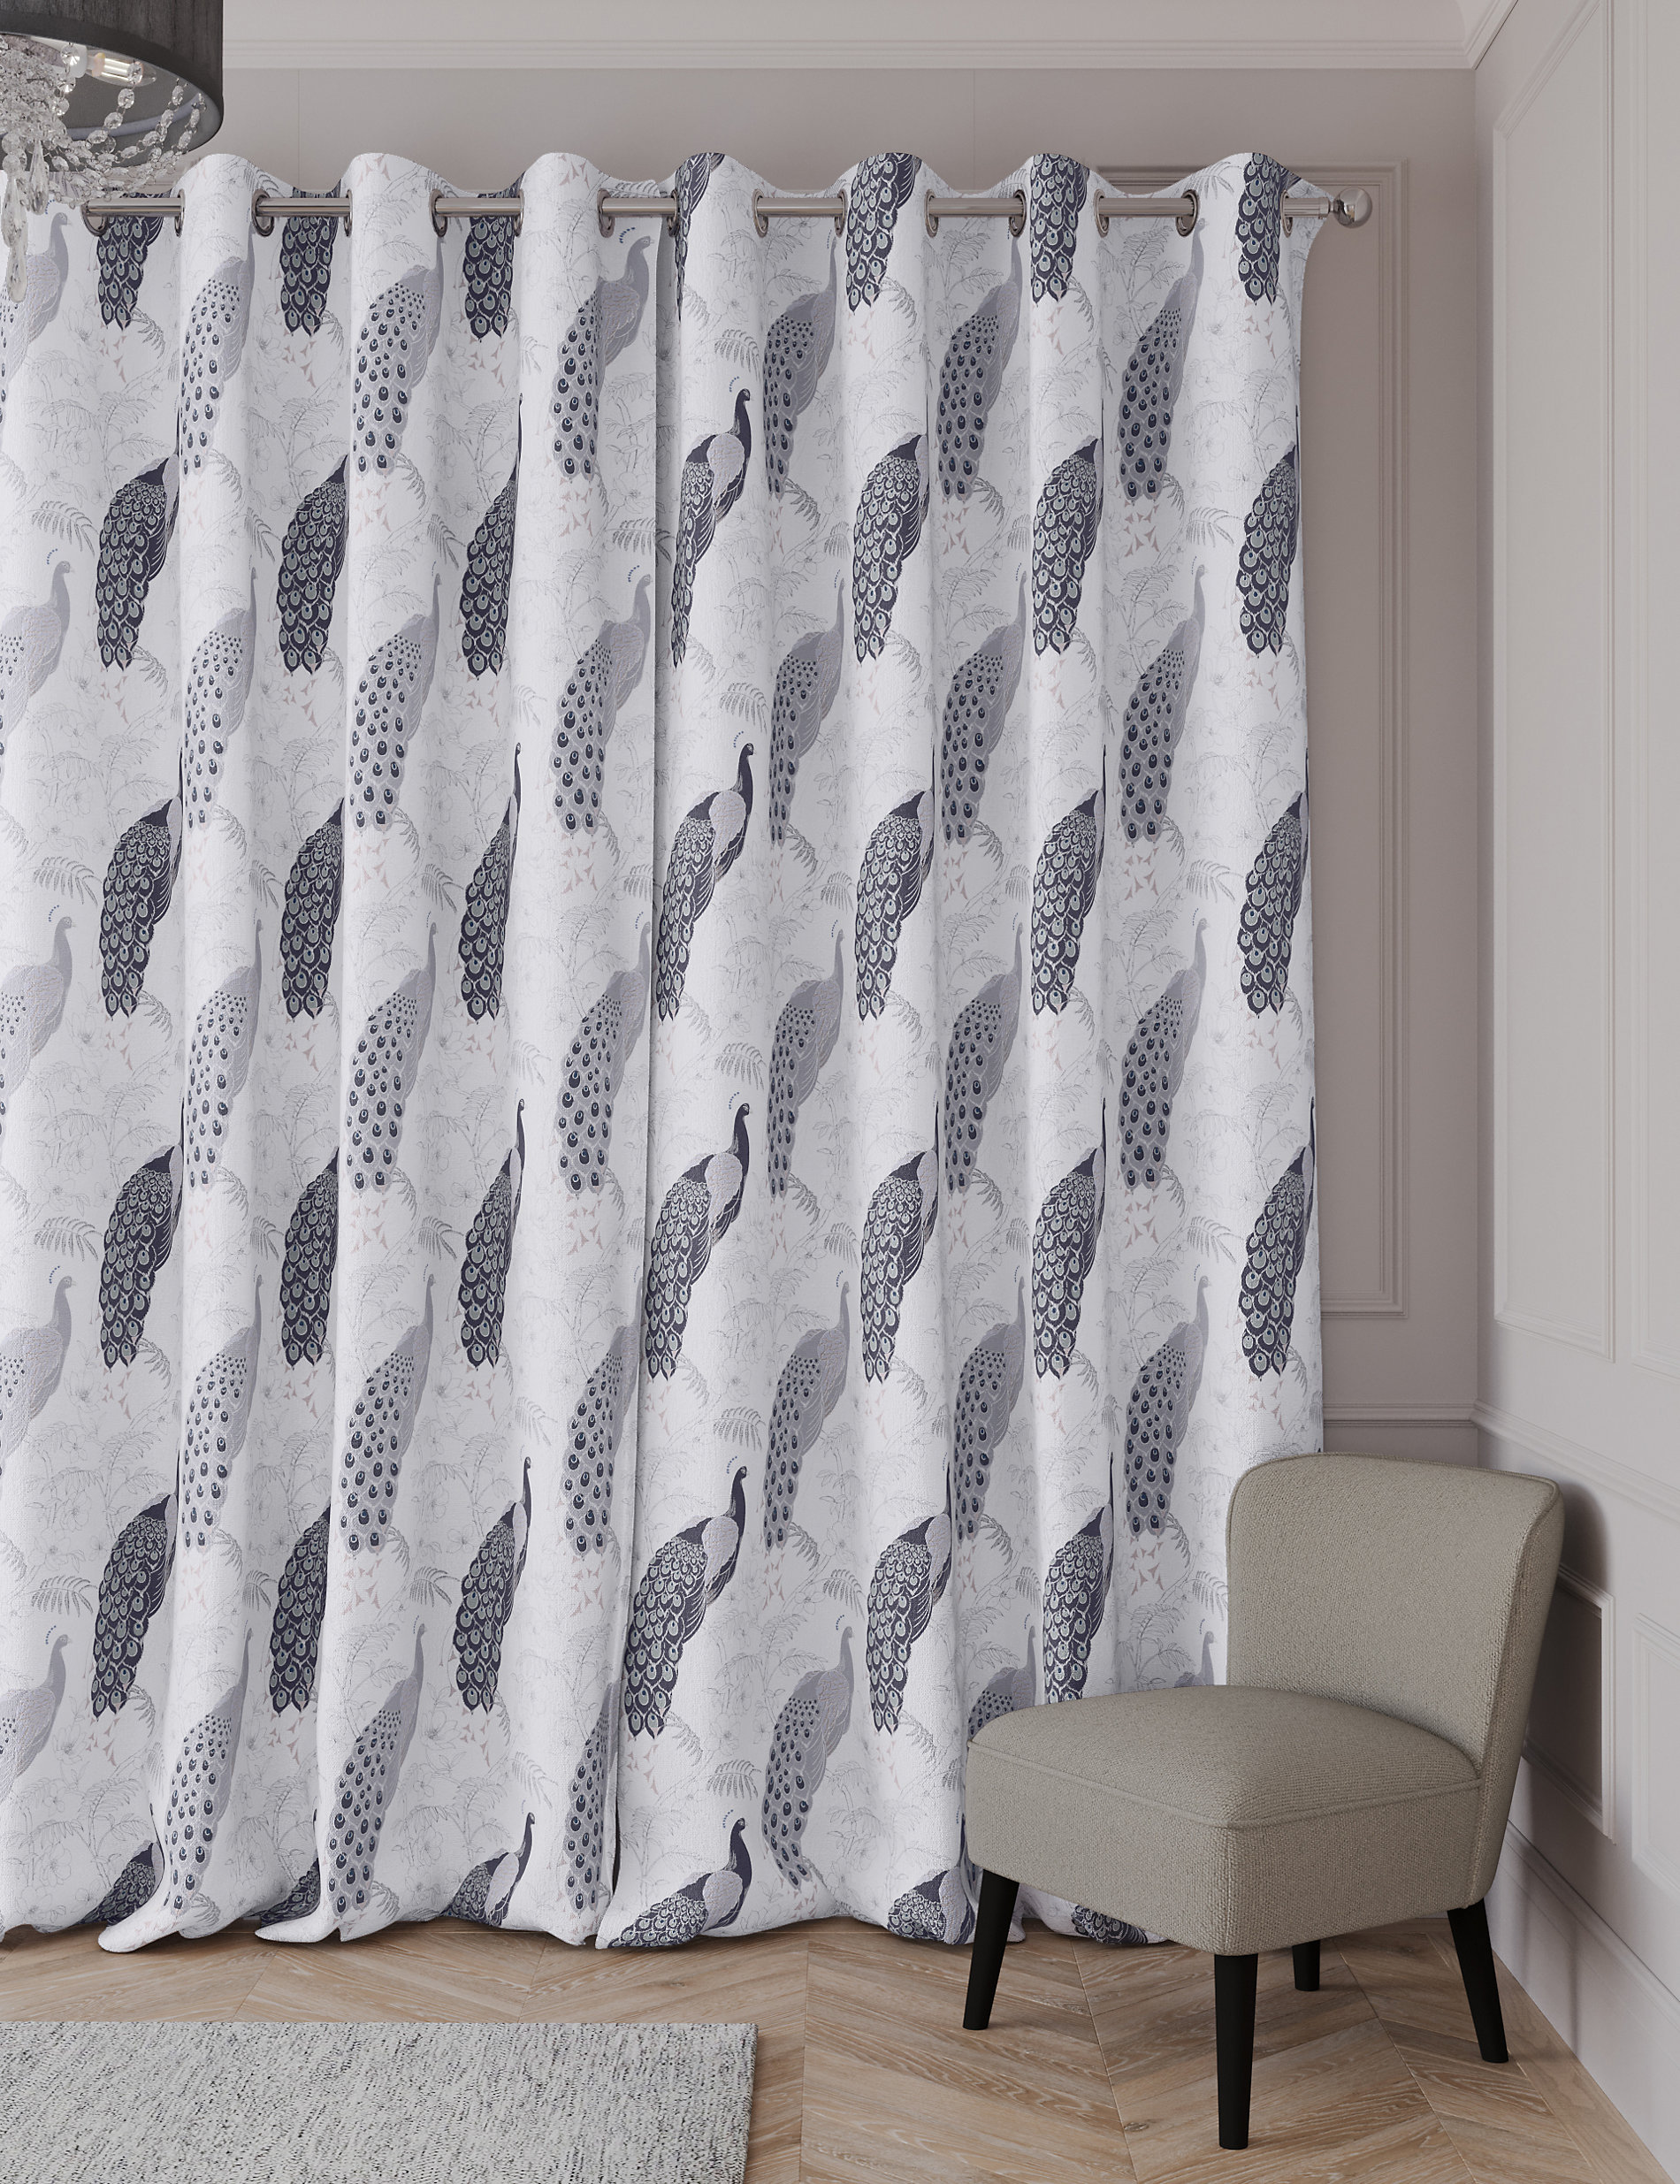 Cotton Rich Peacock Eyelet Blackout Curtains